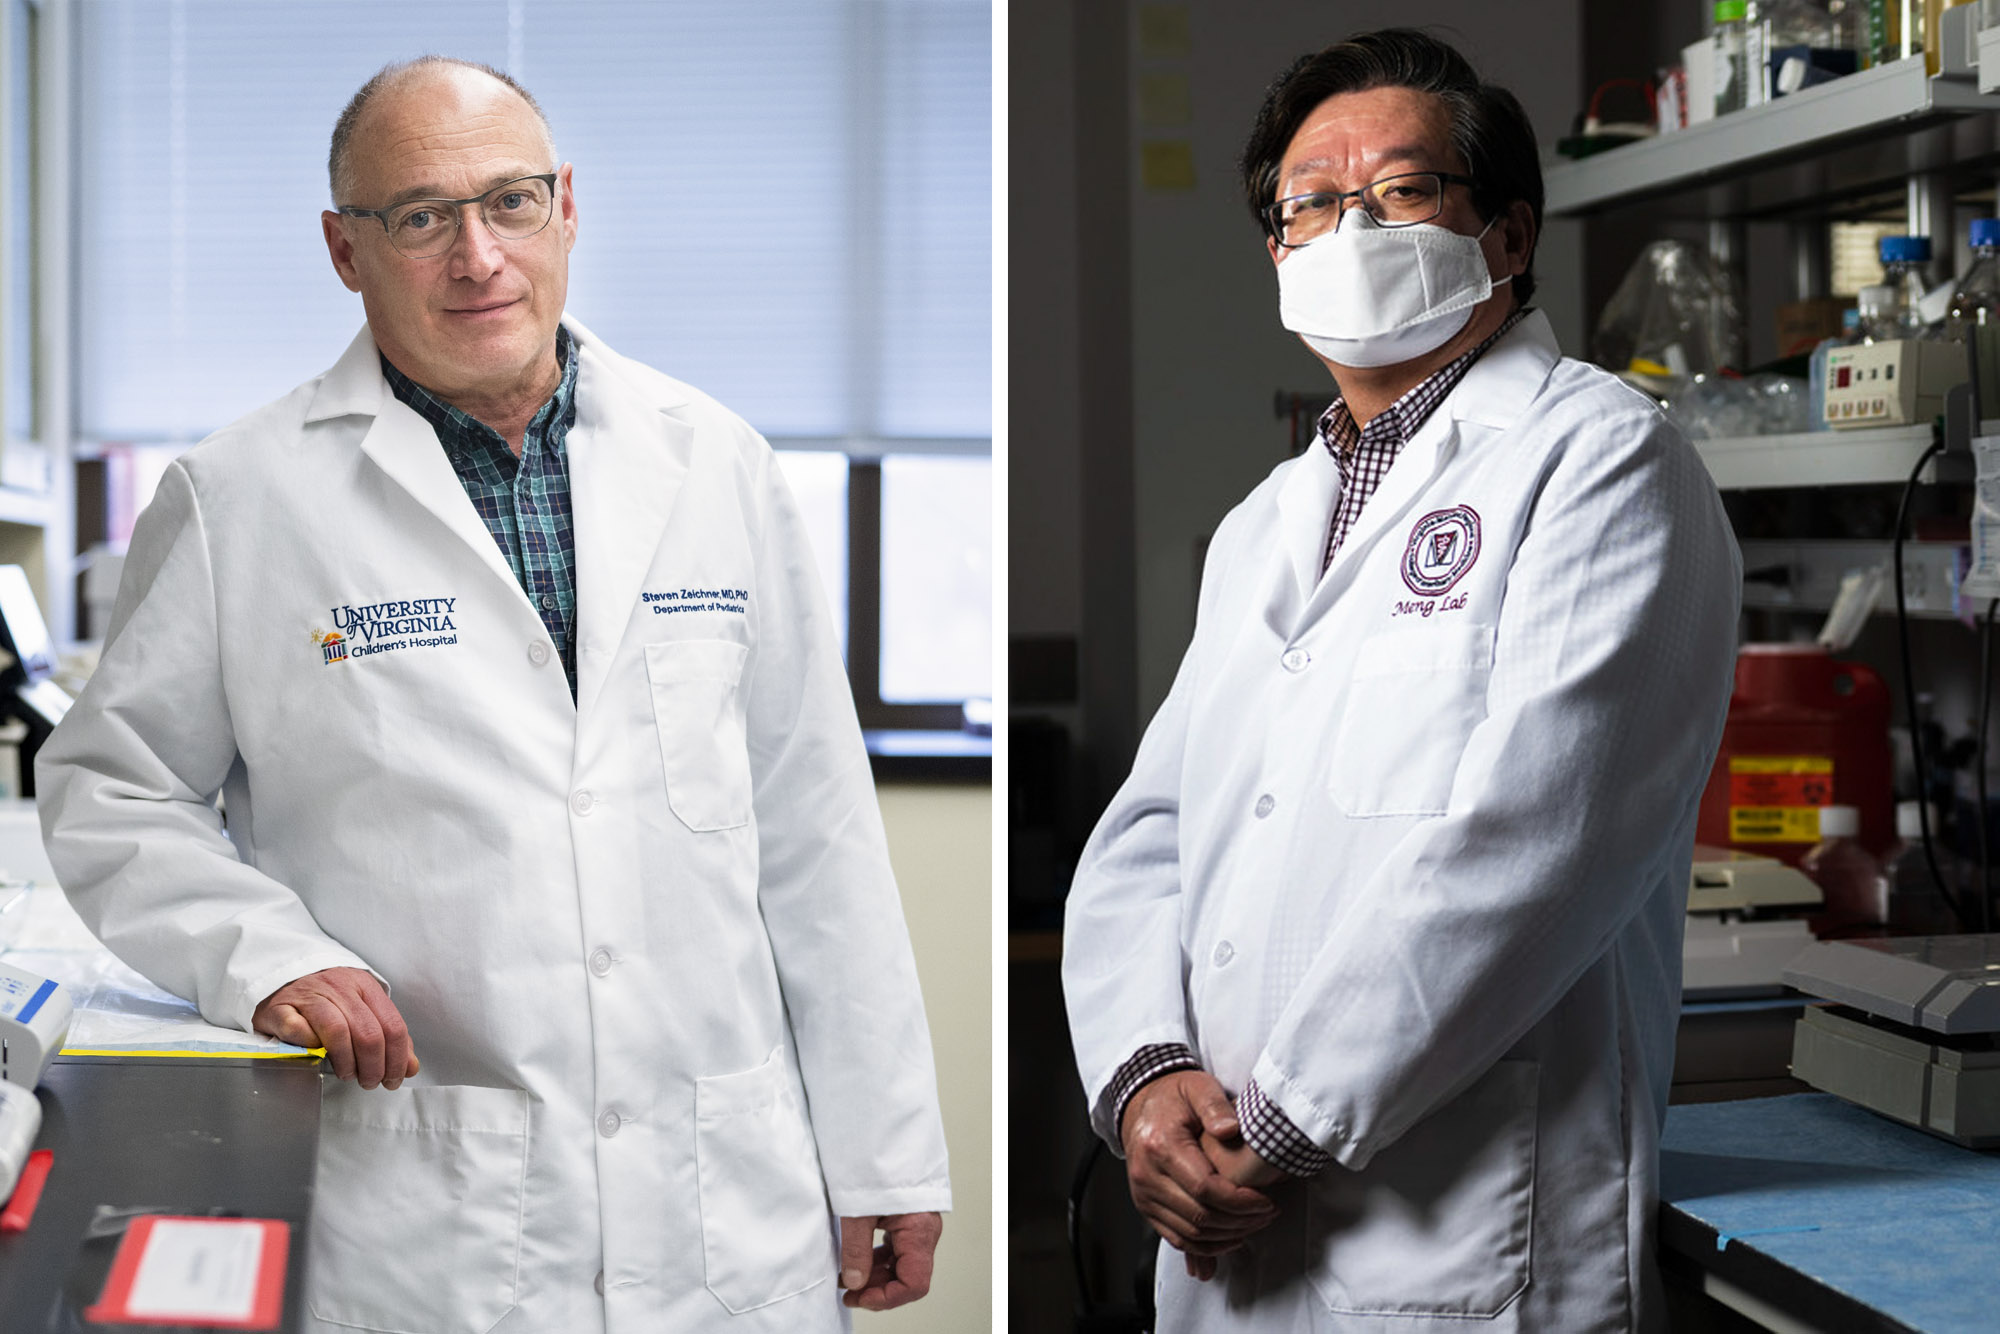 Headshots: left, Dr. Steven Zeichner and right, Dr. Xiang-Jin Meng